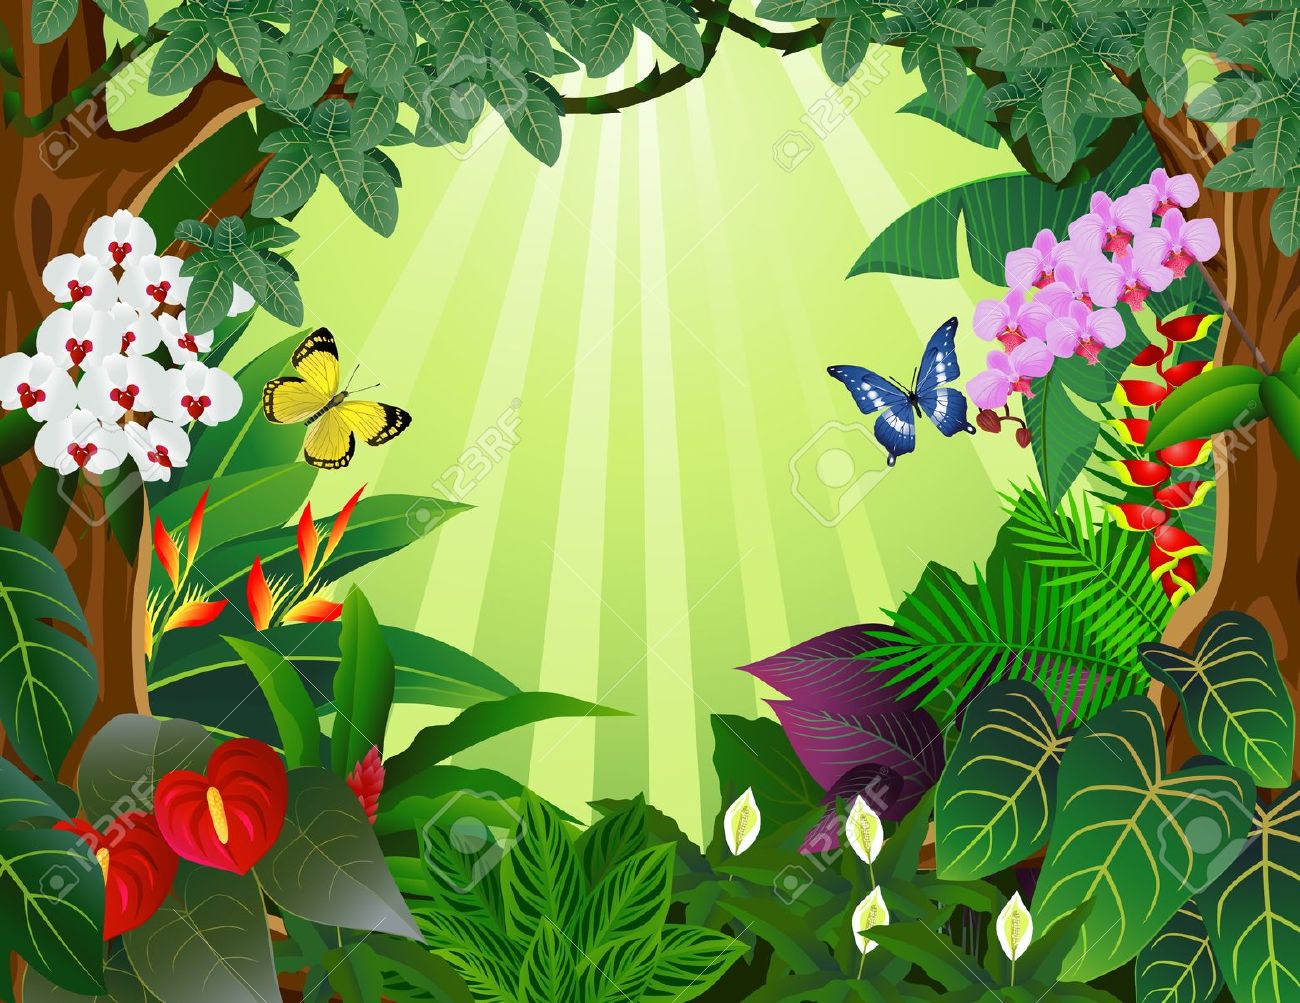 tropical rain forest: Tropical forest bacground